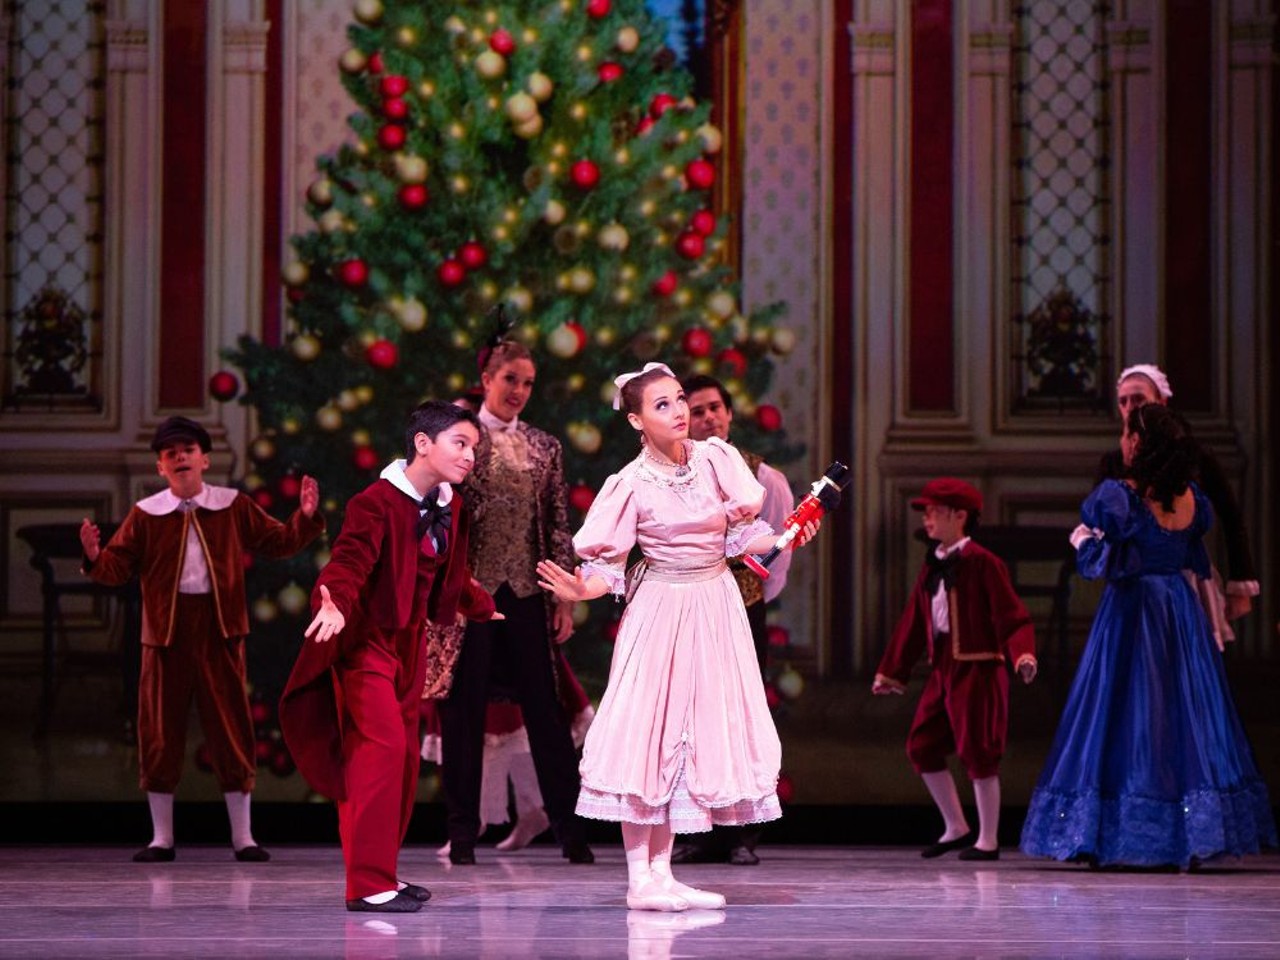 Watch the Nutcracker
The Nutcracker is a can’t-miss holiday tradition, whether you keep it classy with Ballet San Antonio’s production at the Tobin Center, catch a charming show by the Children’s Ballet of San Antonio at Lila Cockrell Theatre, or check Alamo City Arts’ take on the Tchaikovsky classic.